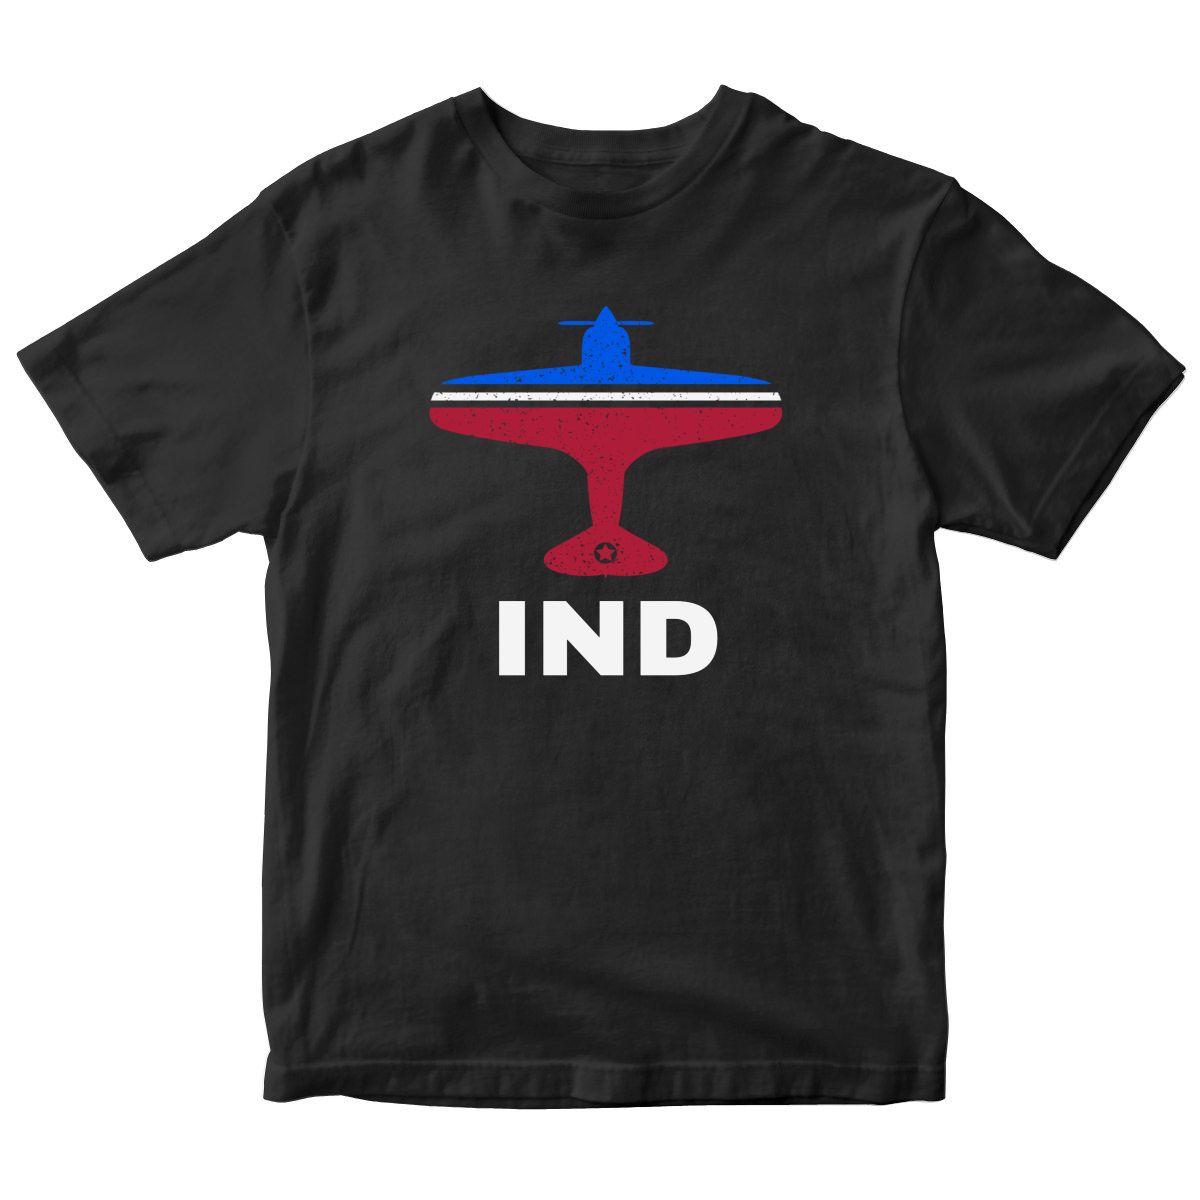 Fly Indianapolis IND Airport Kids T-shirt | Black